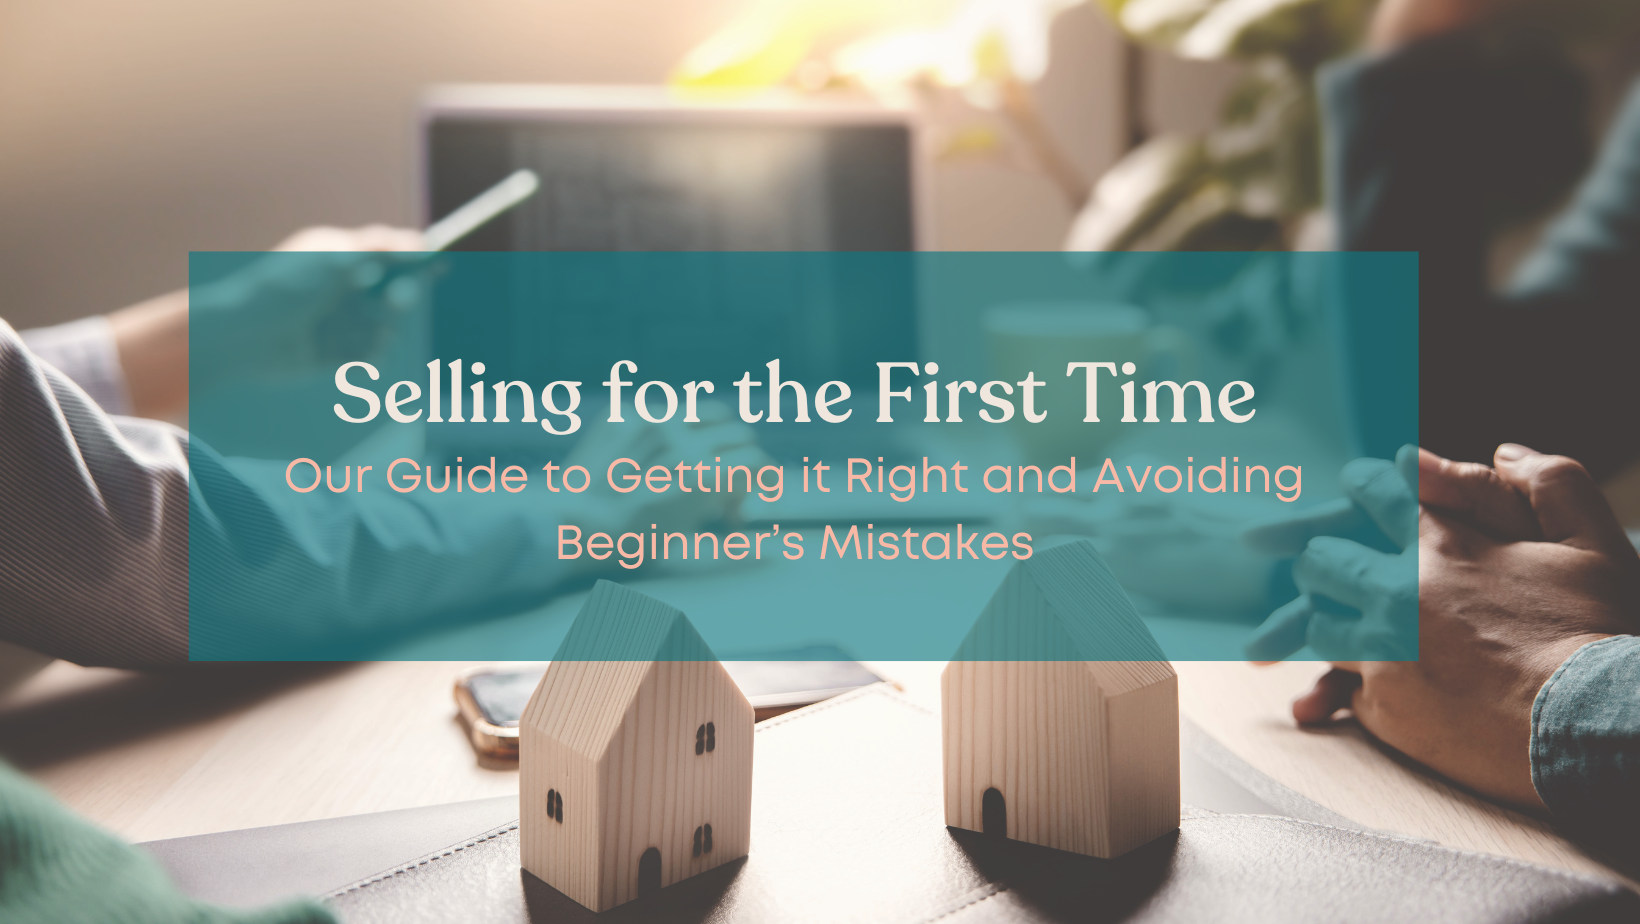 Our Guide to Getting it Right